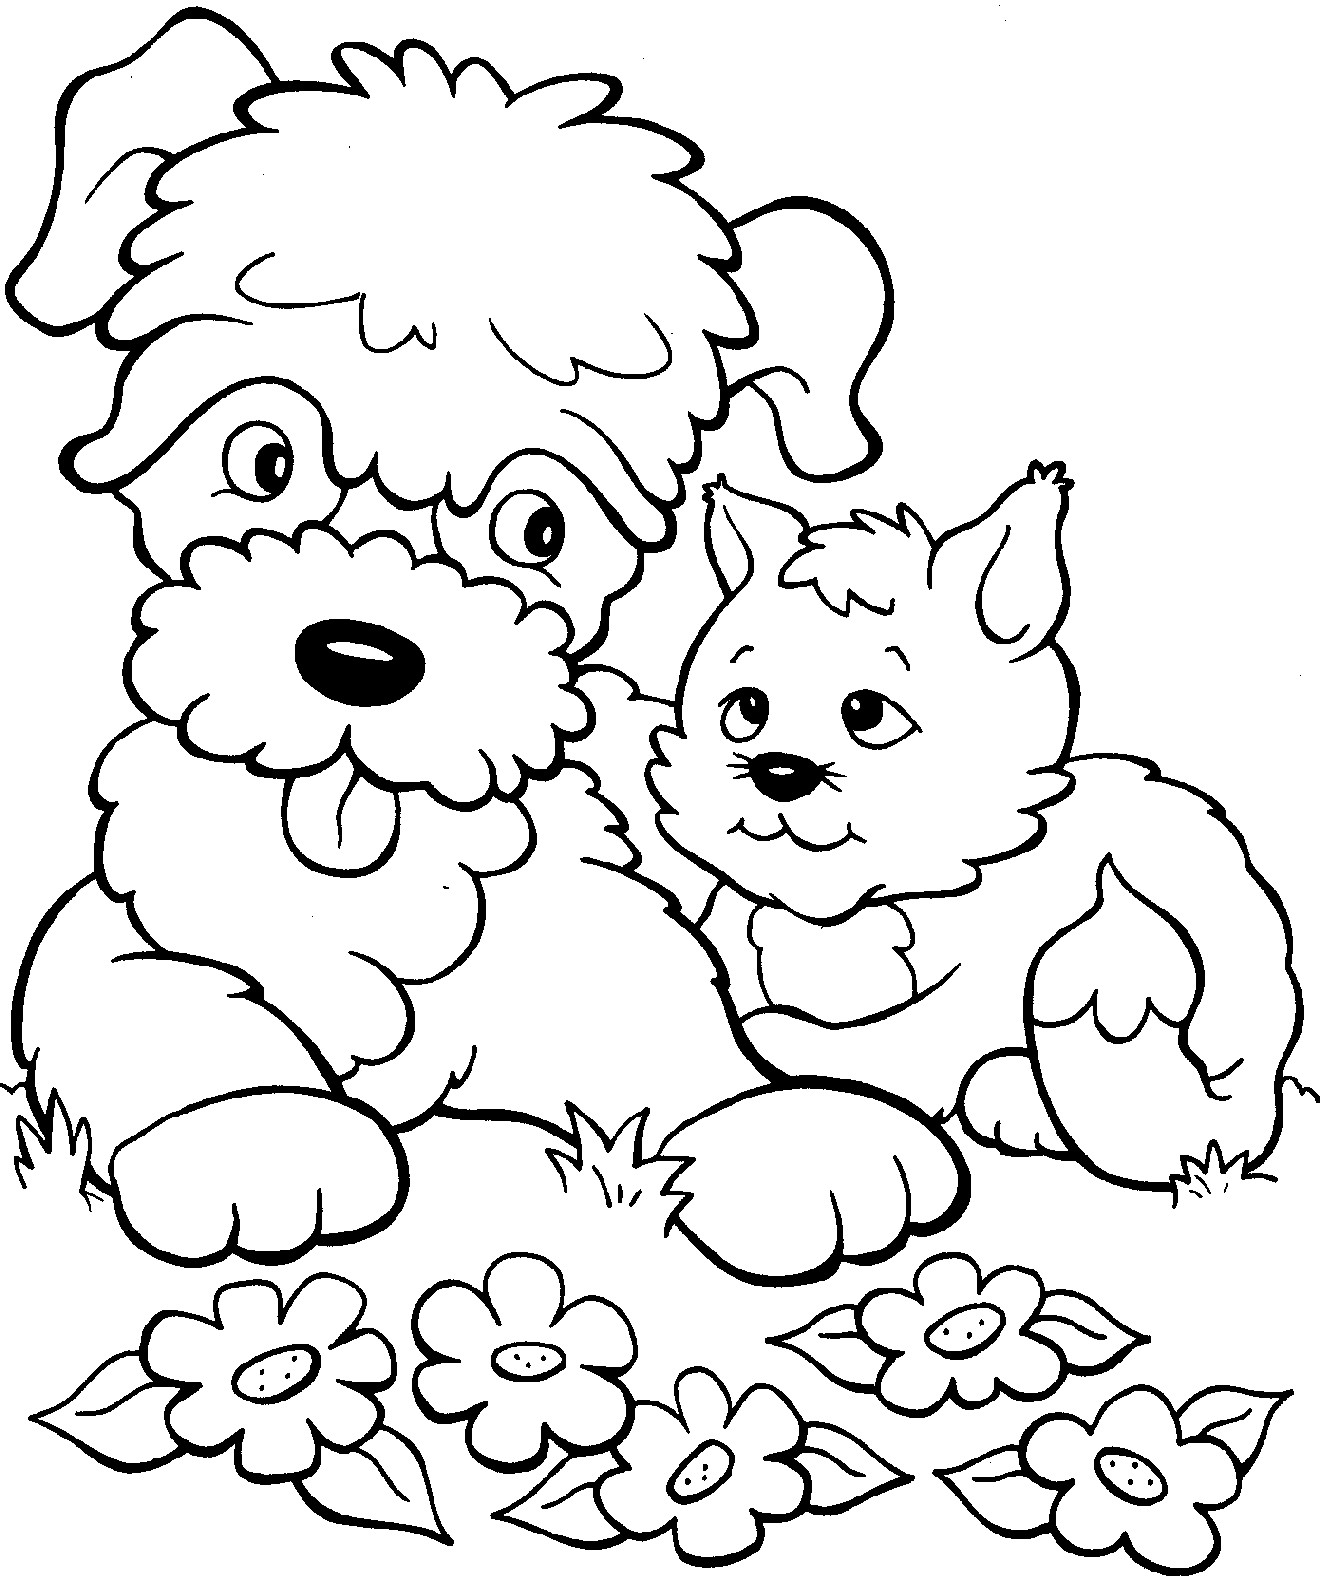 Litten Coloring Pages
 Kitten Coloring Pages Best Coloring Pages For Kids